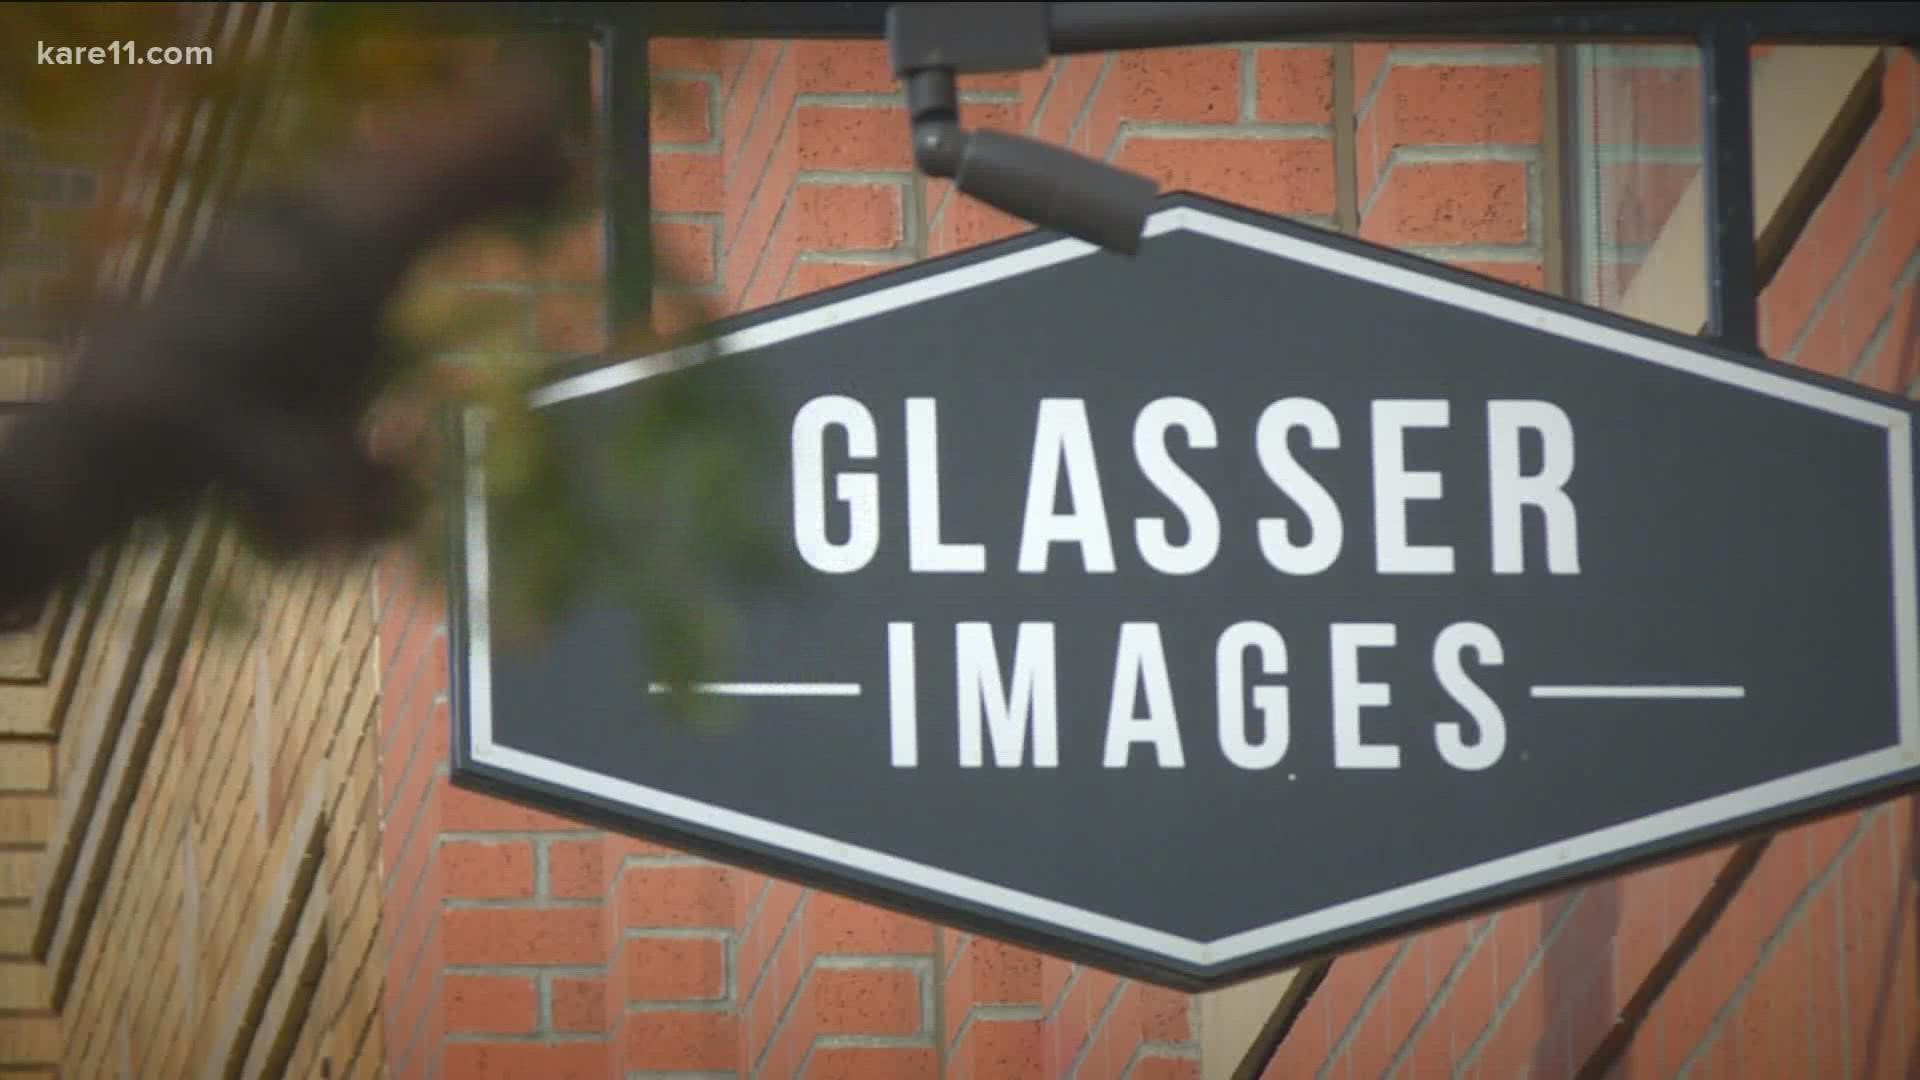 Glasser Images, which is based in Bismarck but serves customers in Minnesota, is not offering refunds after closing without warning.